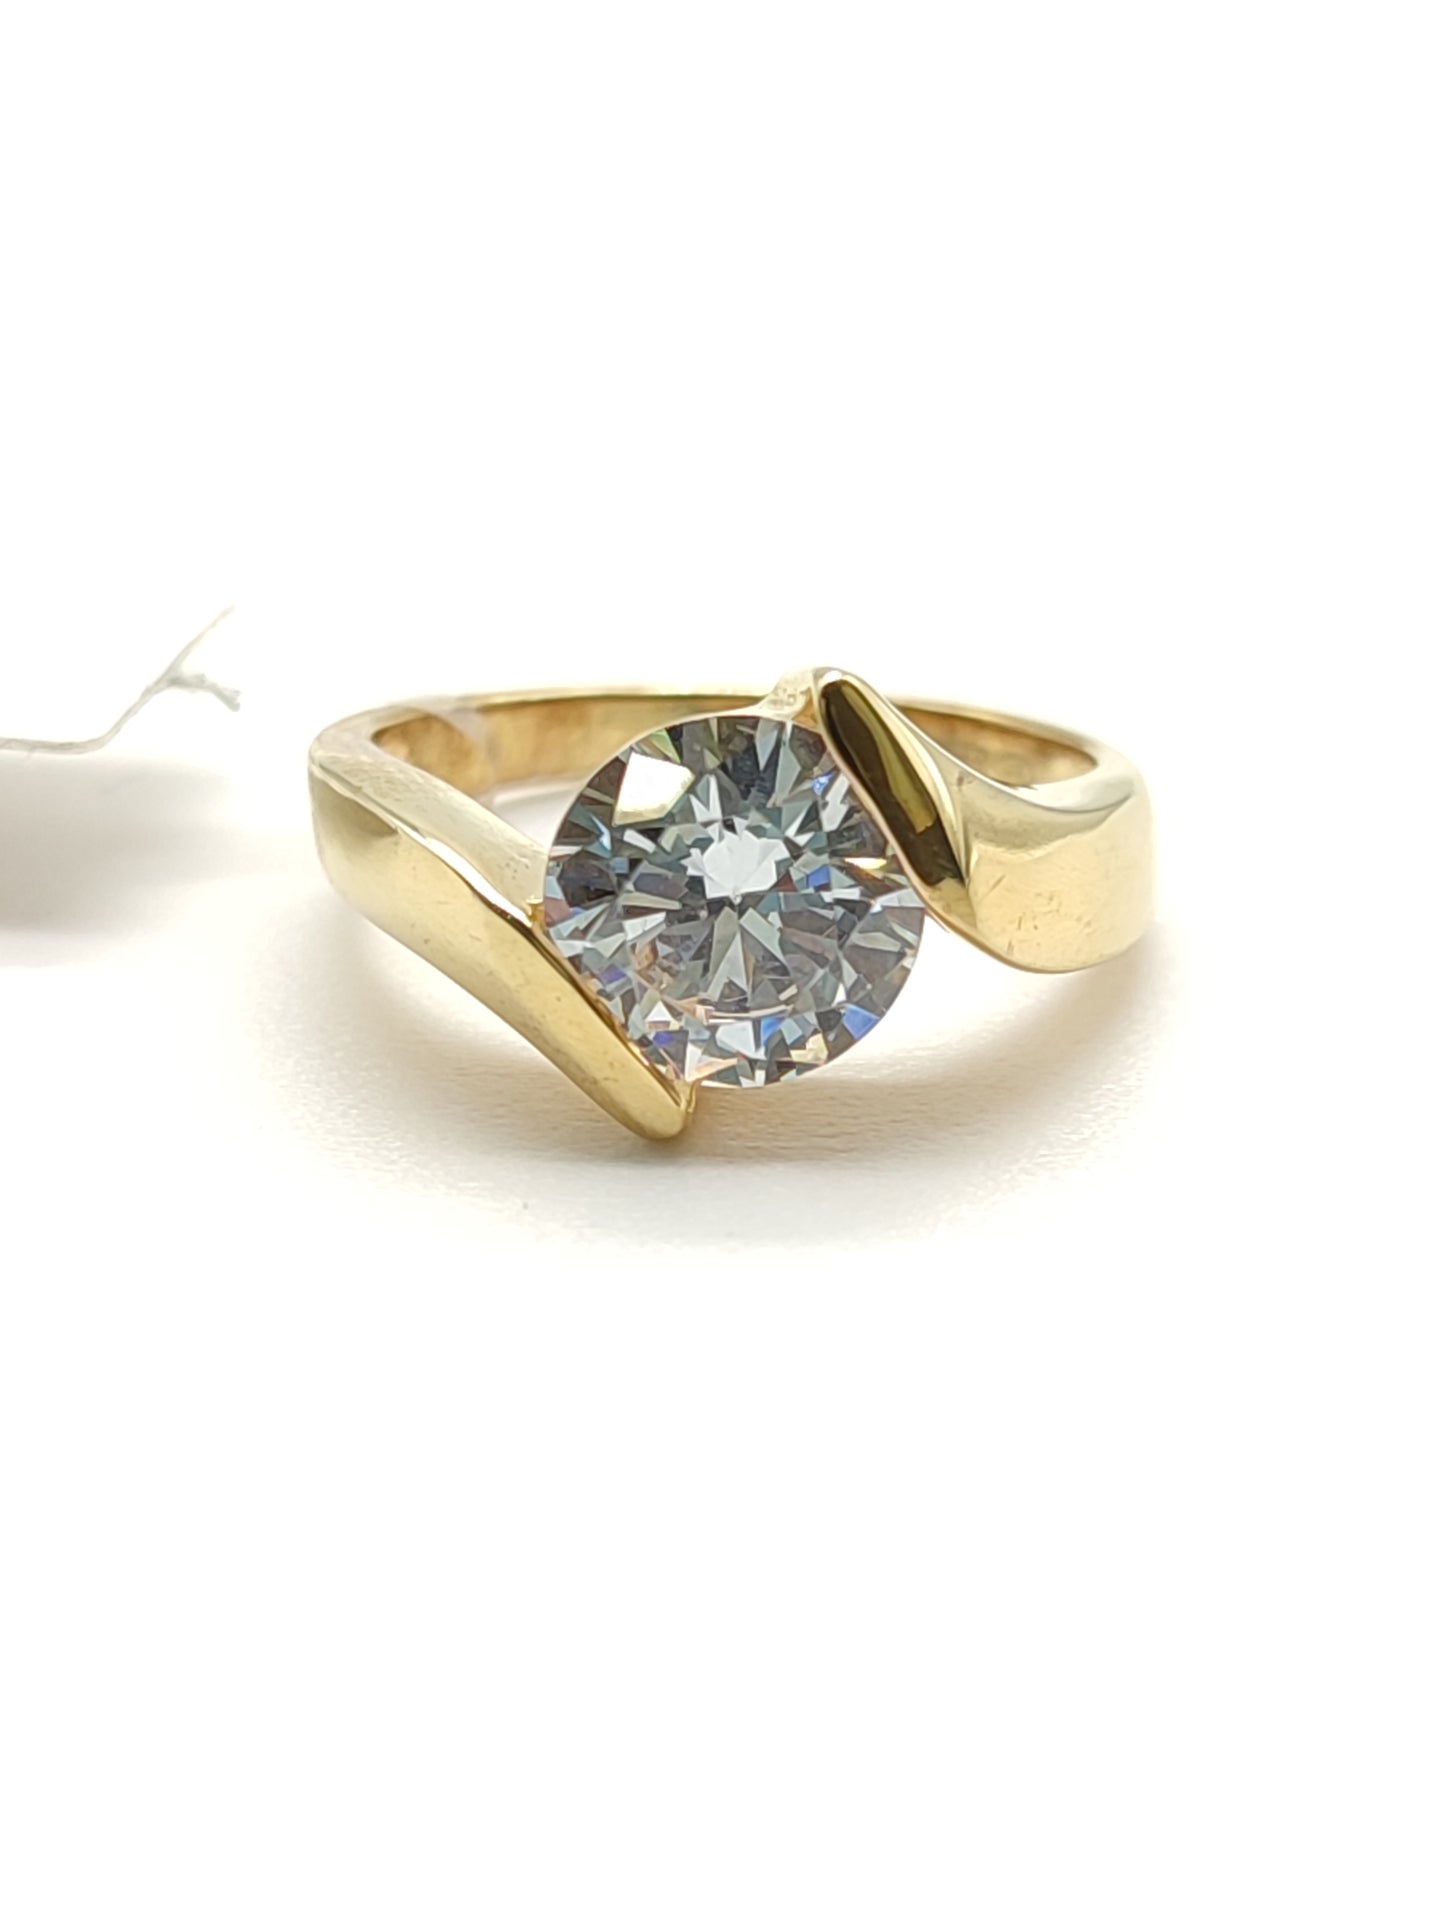 Yellow golden solitaire silver ring